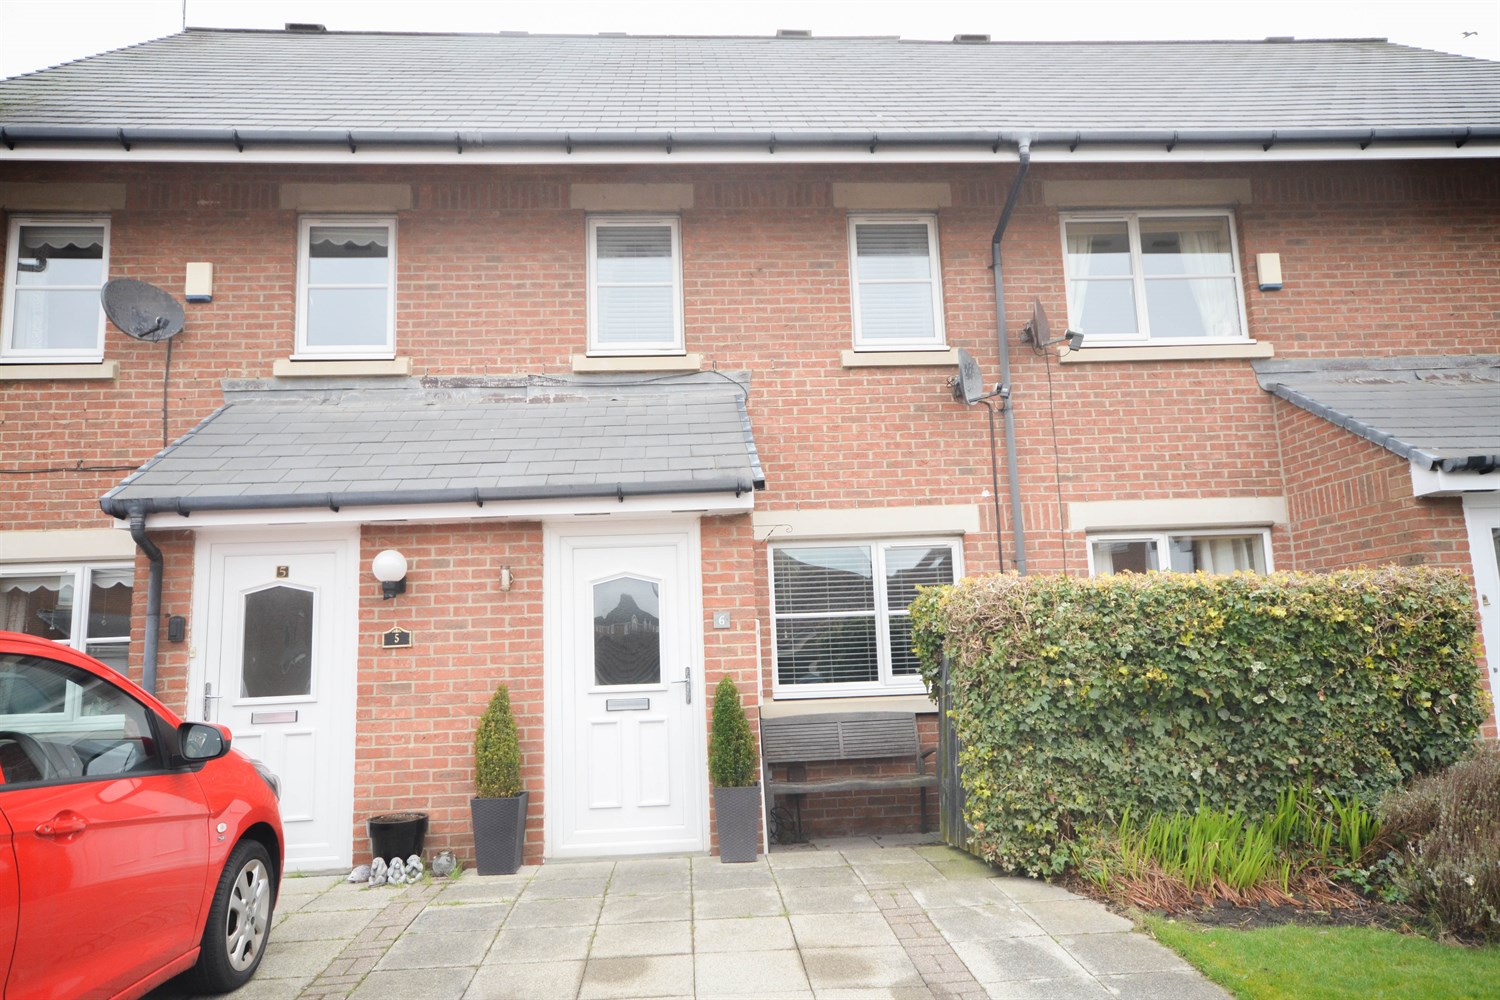 2 bed house for sale in Haven Court, Sunderland - Property Image 1